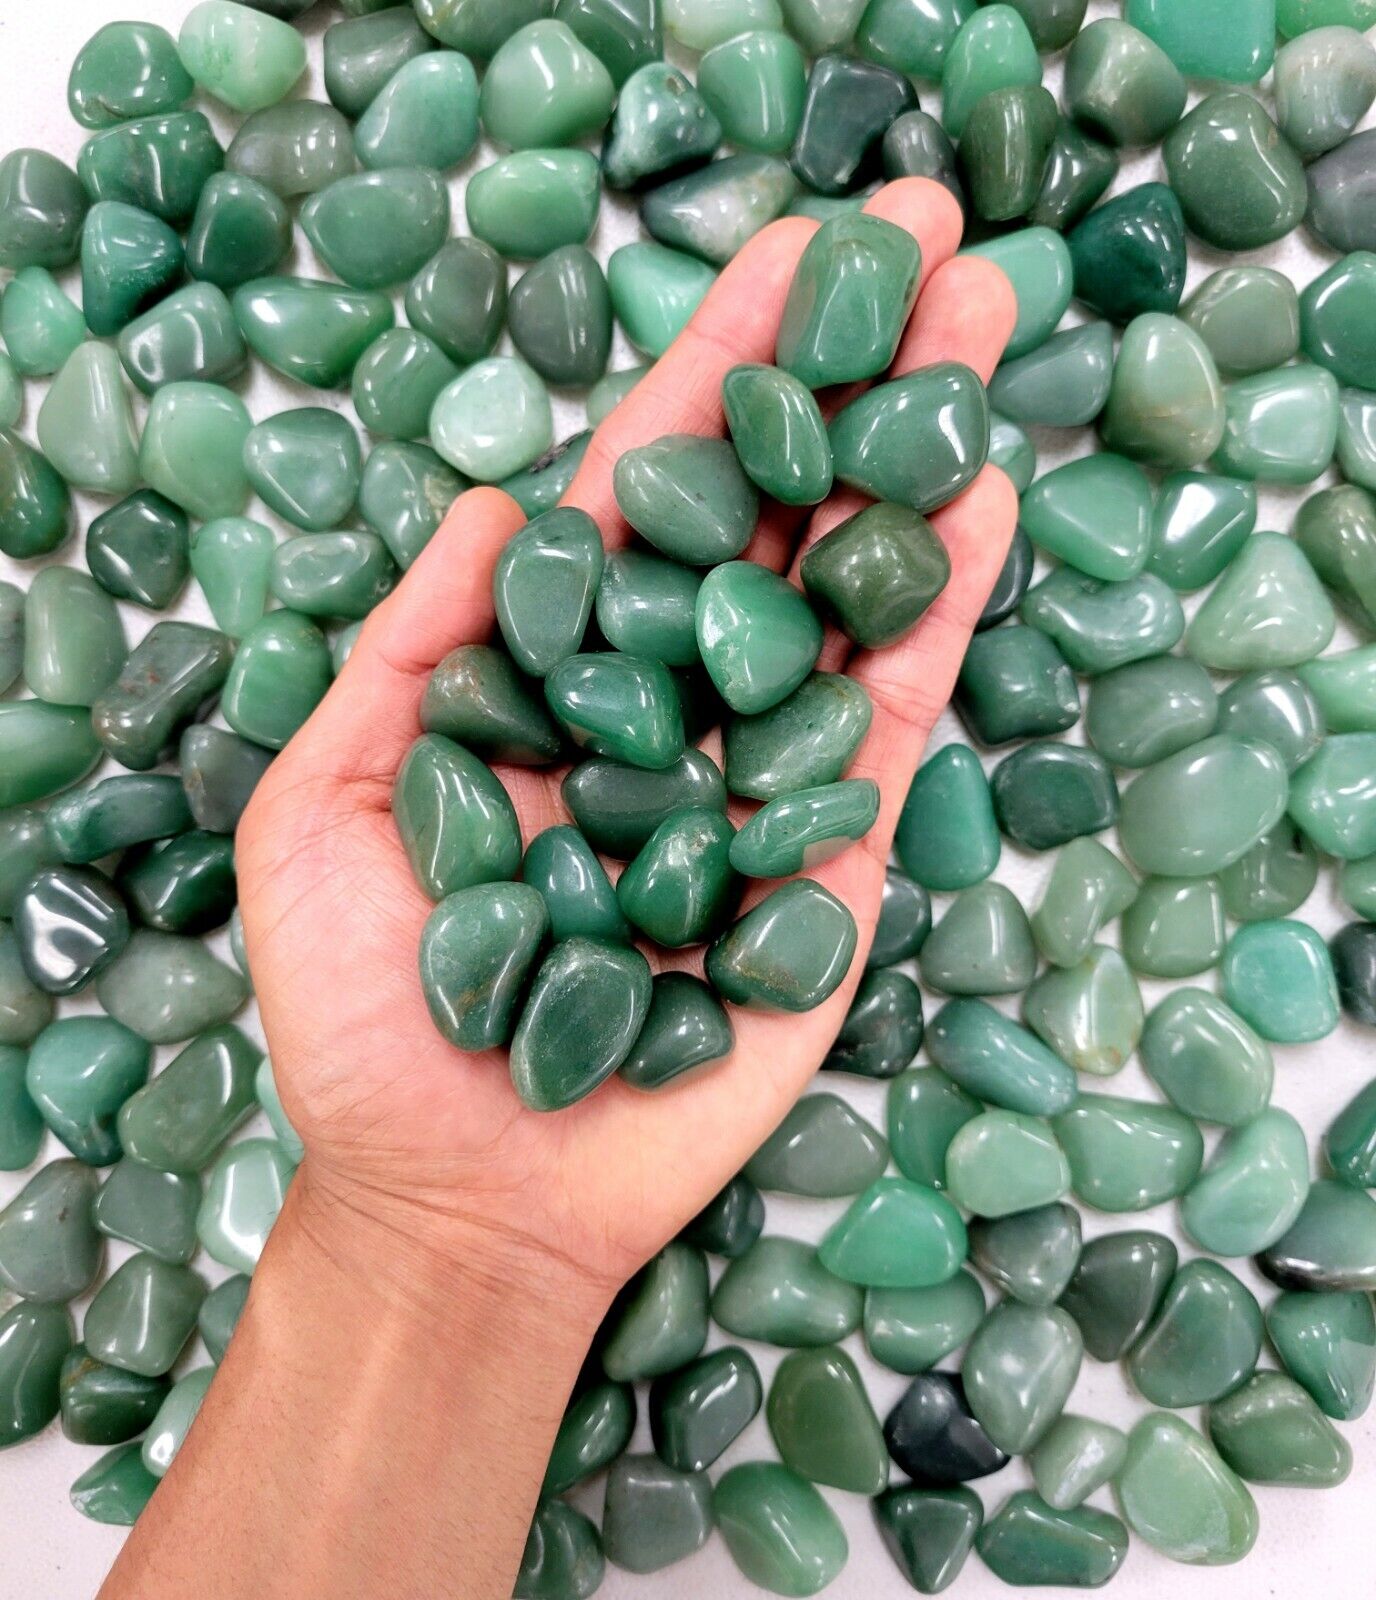 Bulk Tumbled Green Aventurine Crystals 1/2 inch to 1 inch Natural Healing Stones